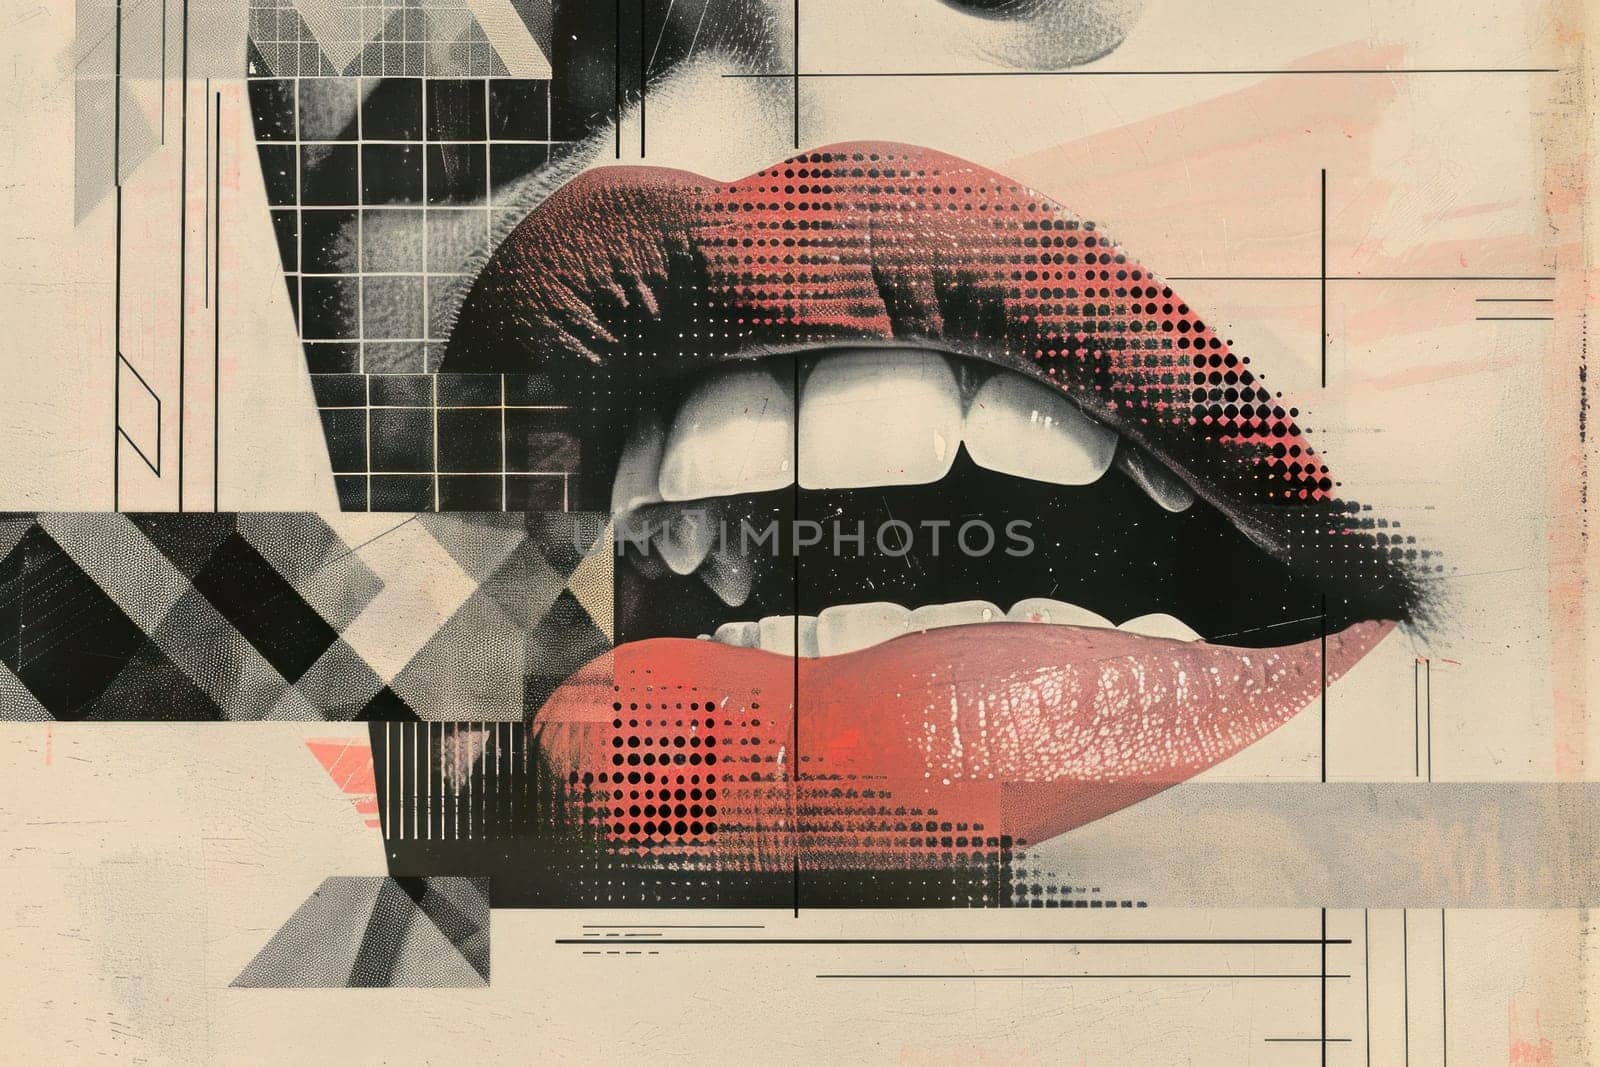 Beauty and artistic geometric shapes surrounding woman's luscious lips on poster for fashion event